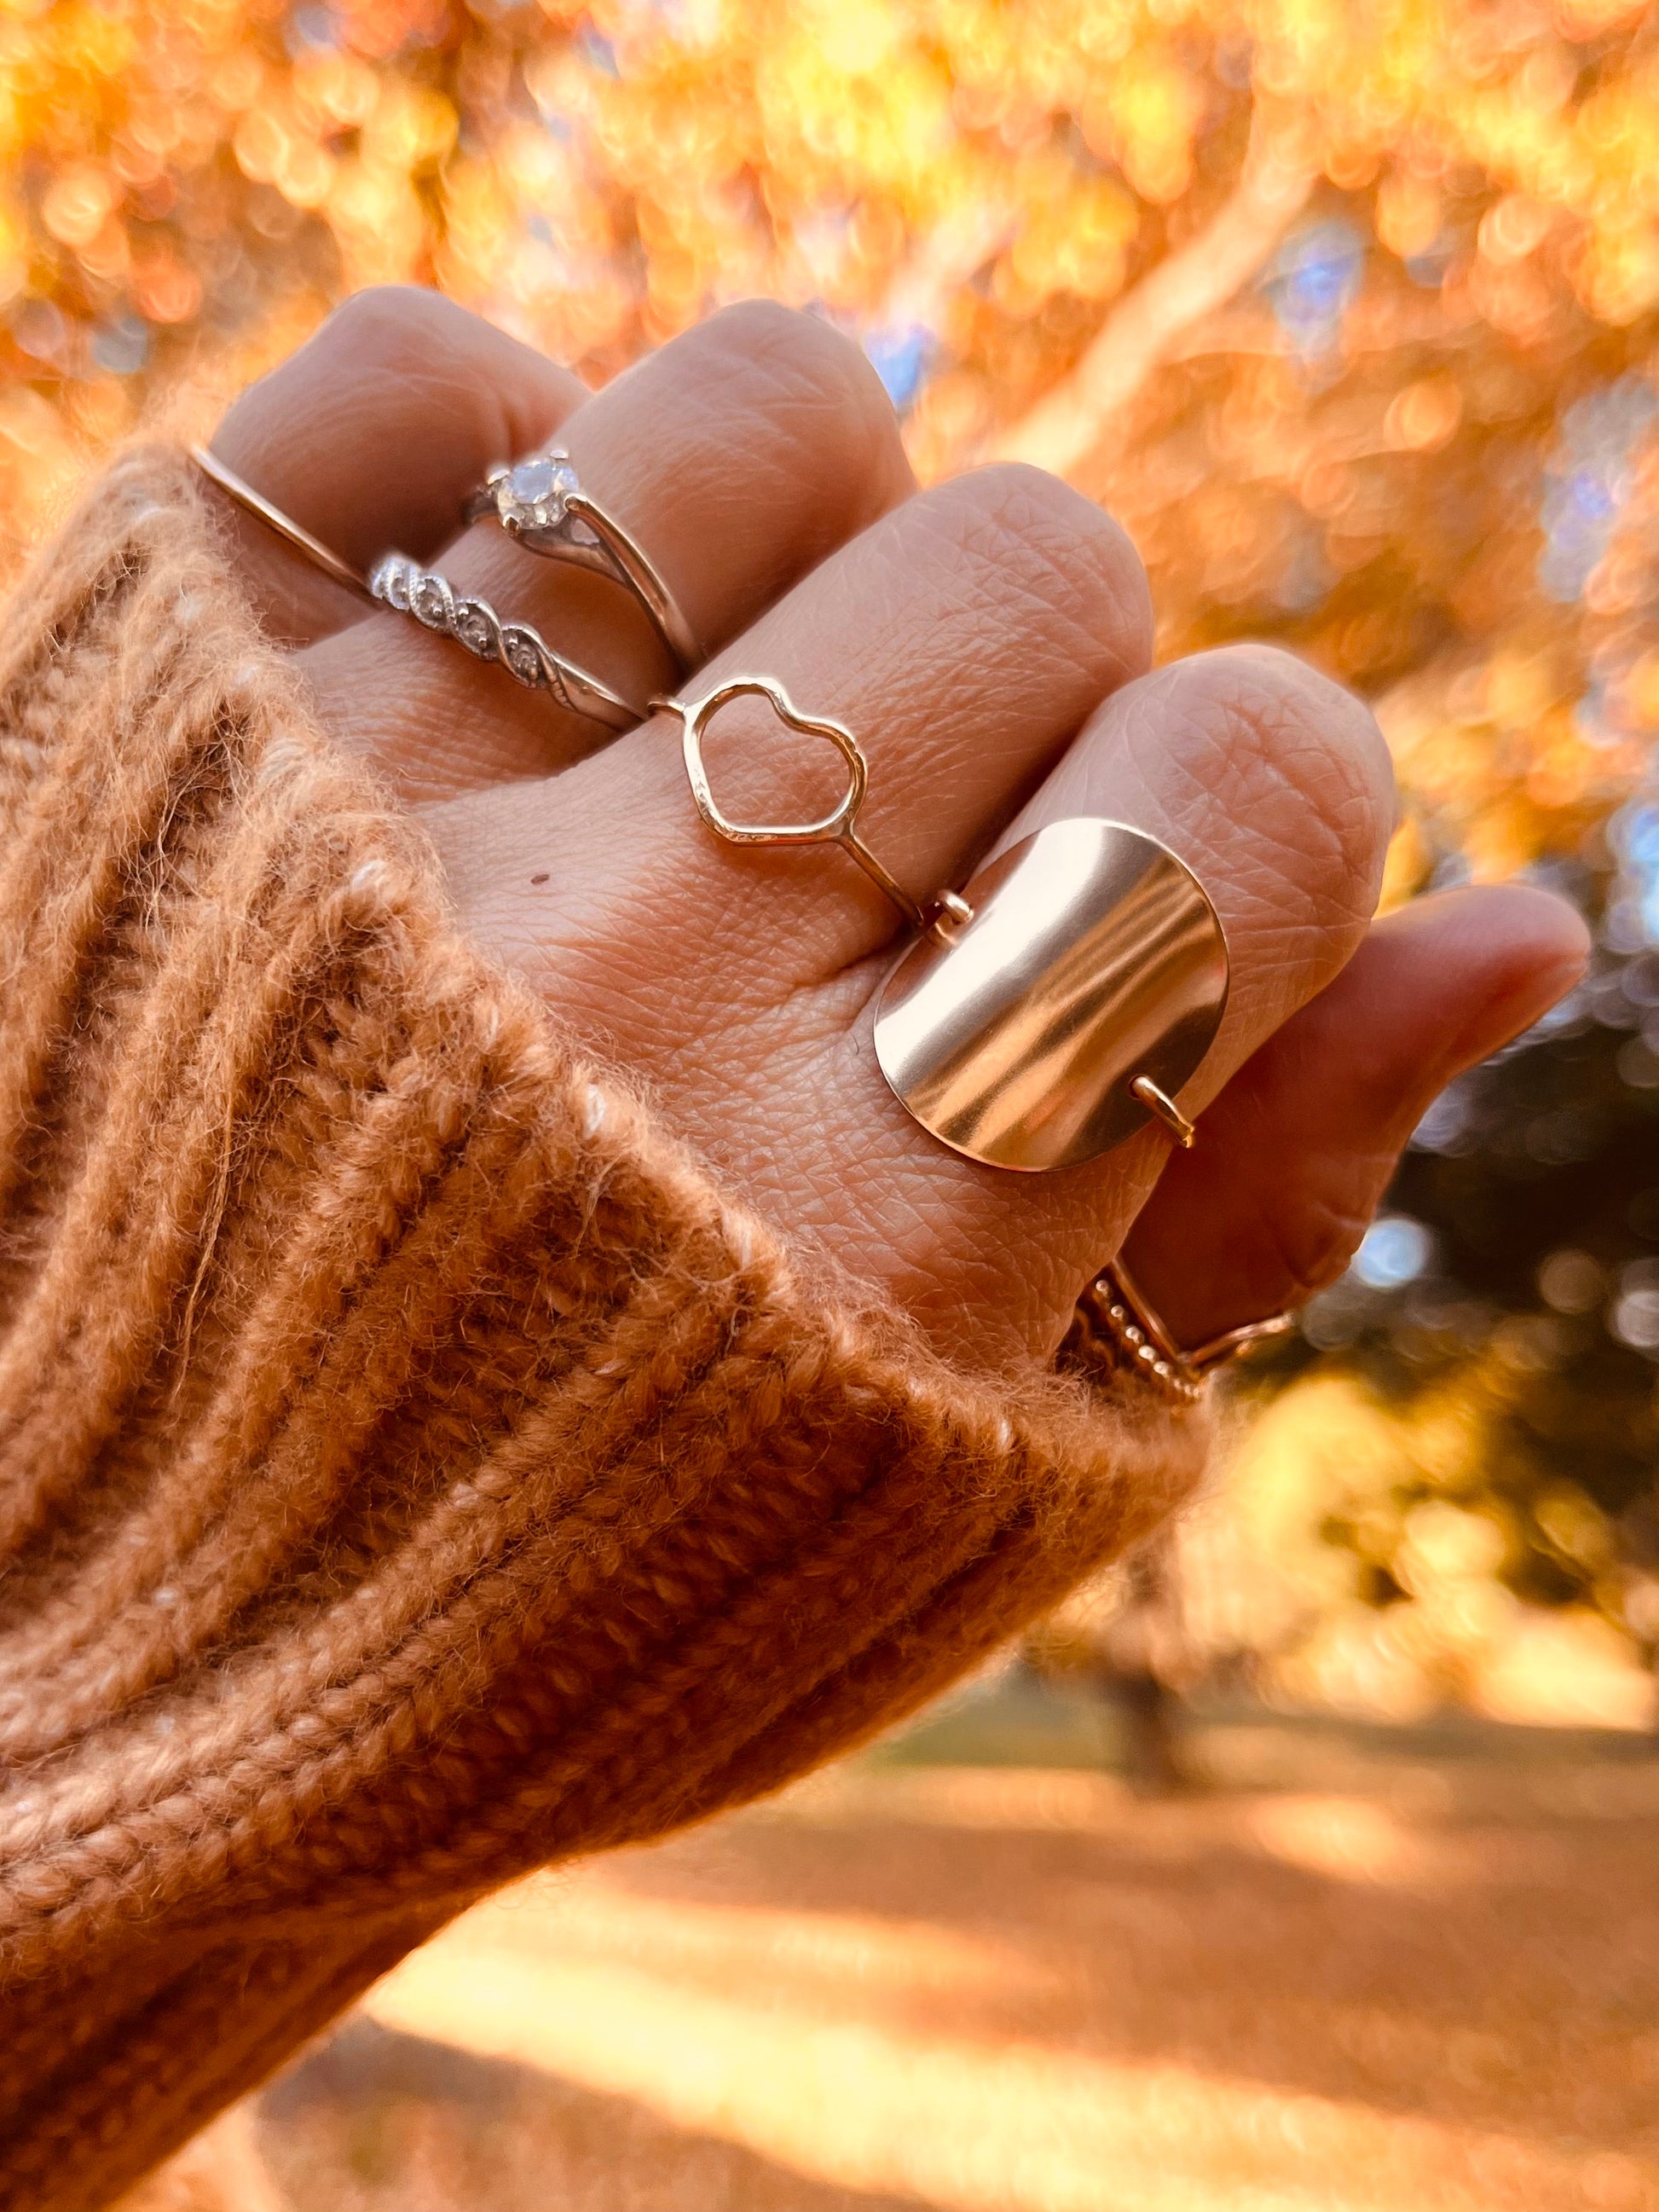 Disc Ring, Smooth Disc Ring, Statement Ring, Large Disc Ring, Circle Ring, Gift For Her, 14K Gold Filled Ring, Sterling Silver Ring, Silver Disc Rings, Gold Disc Rings, Gift For Her, Gift For Mom, Holiday gift guide, Holiday Gift Ideas, Christmas Gifts, Everyday Rings